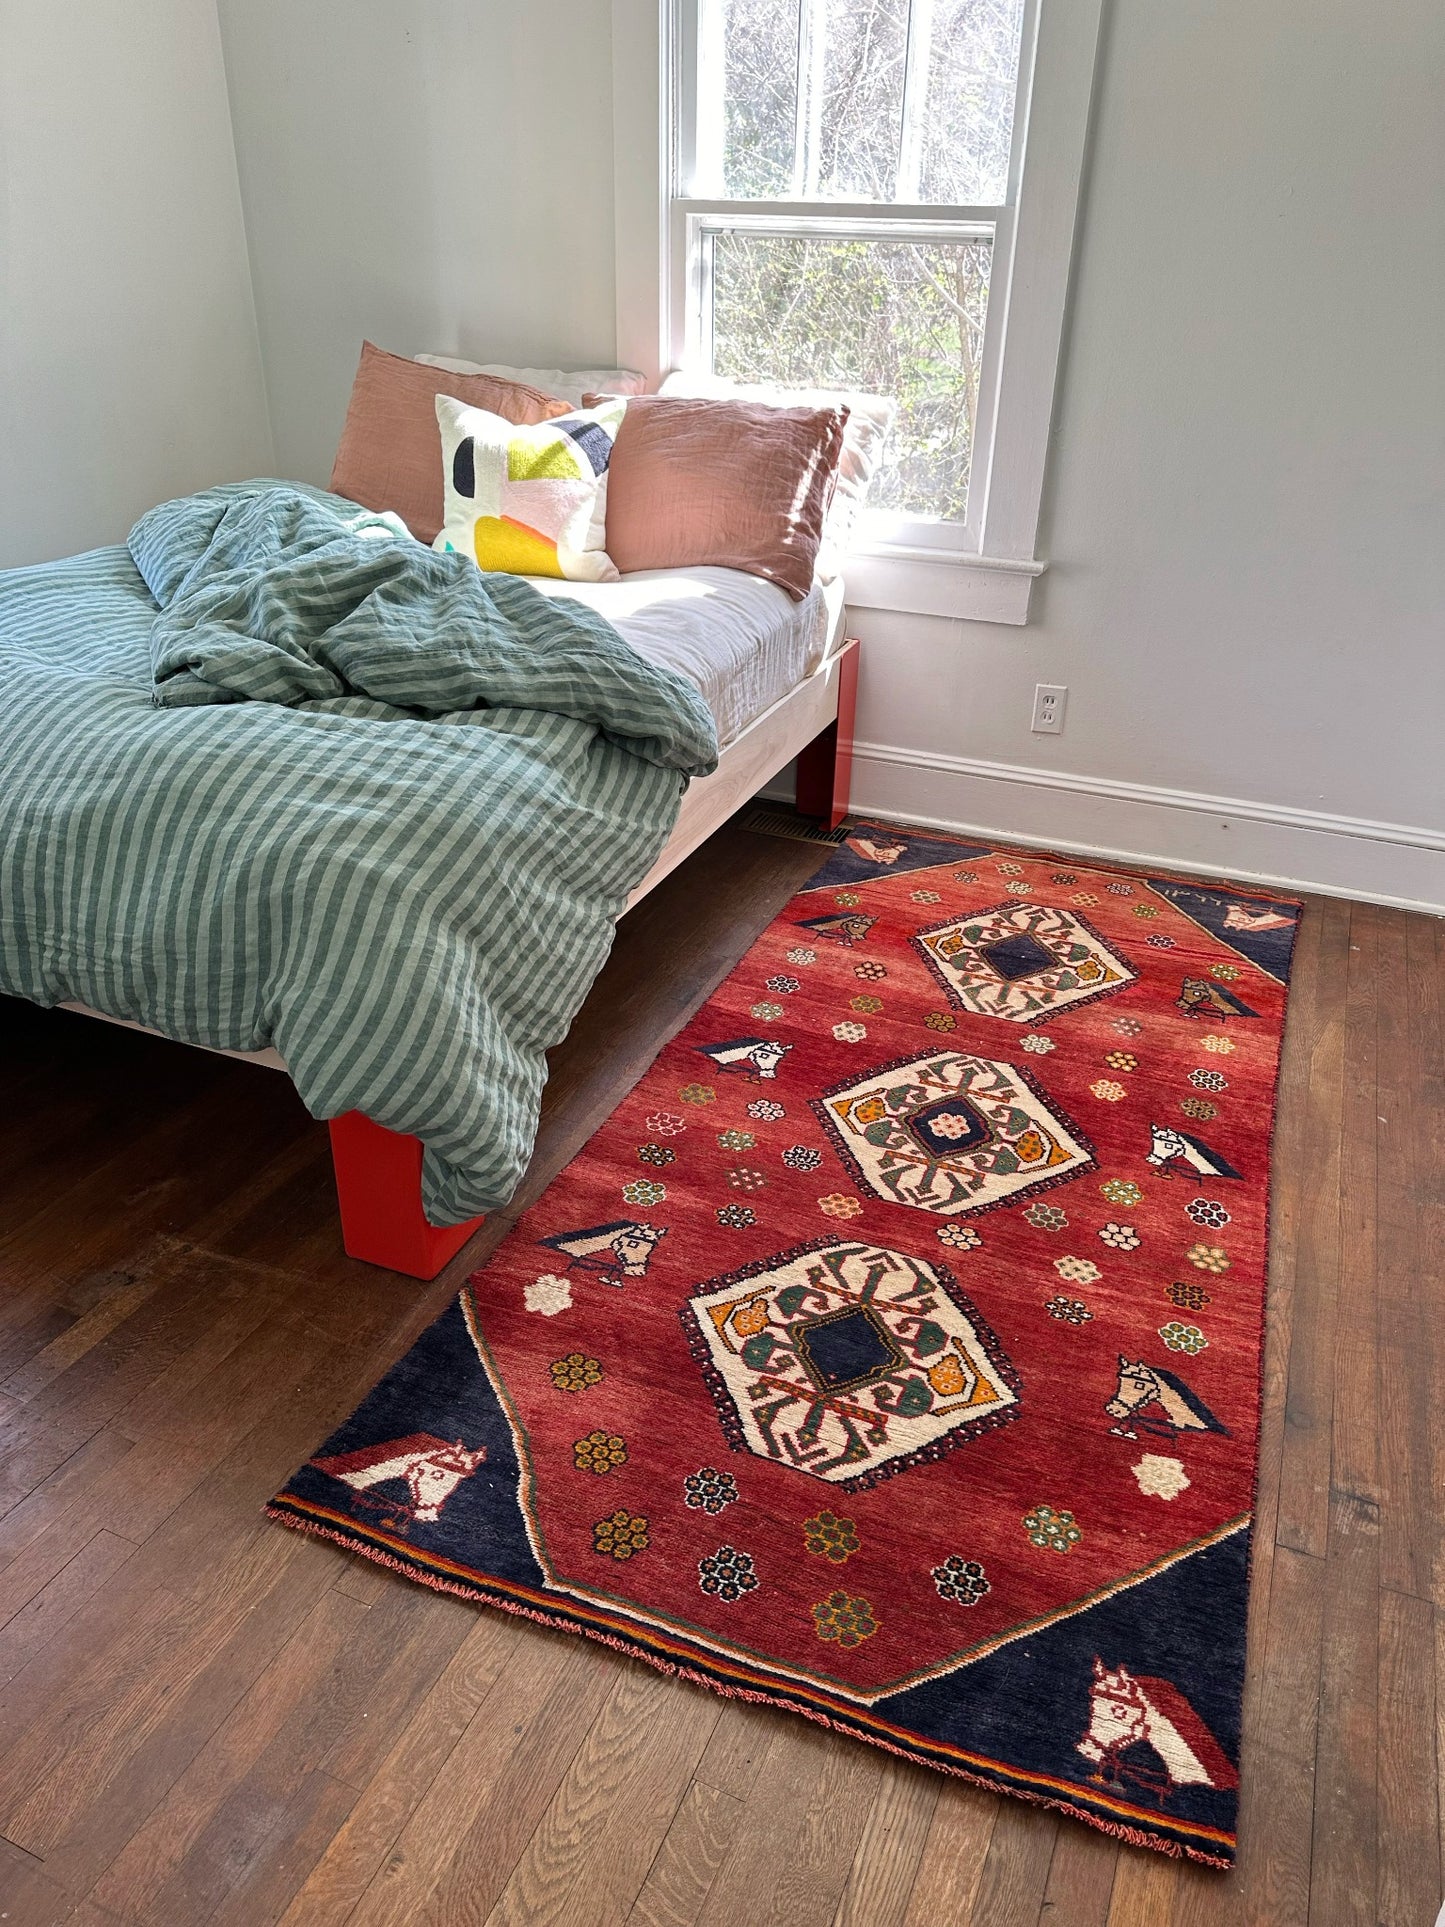 Style Basseri Red Horse Motif Rug in a Bedroom